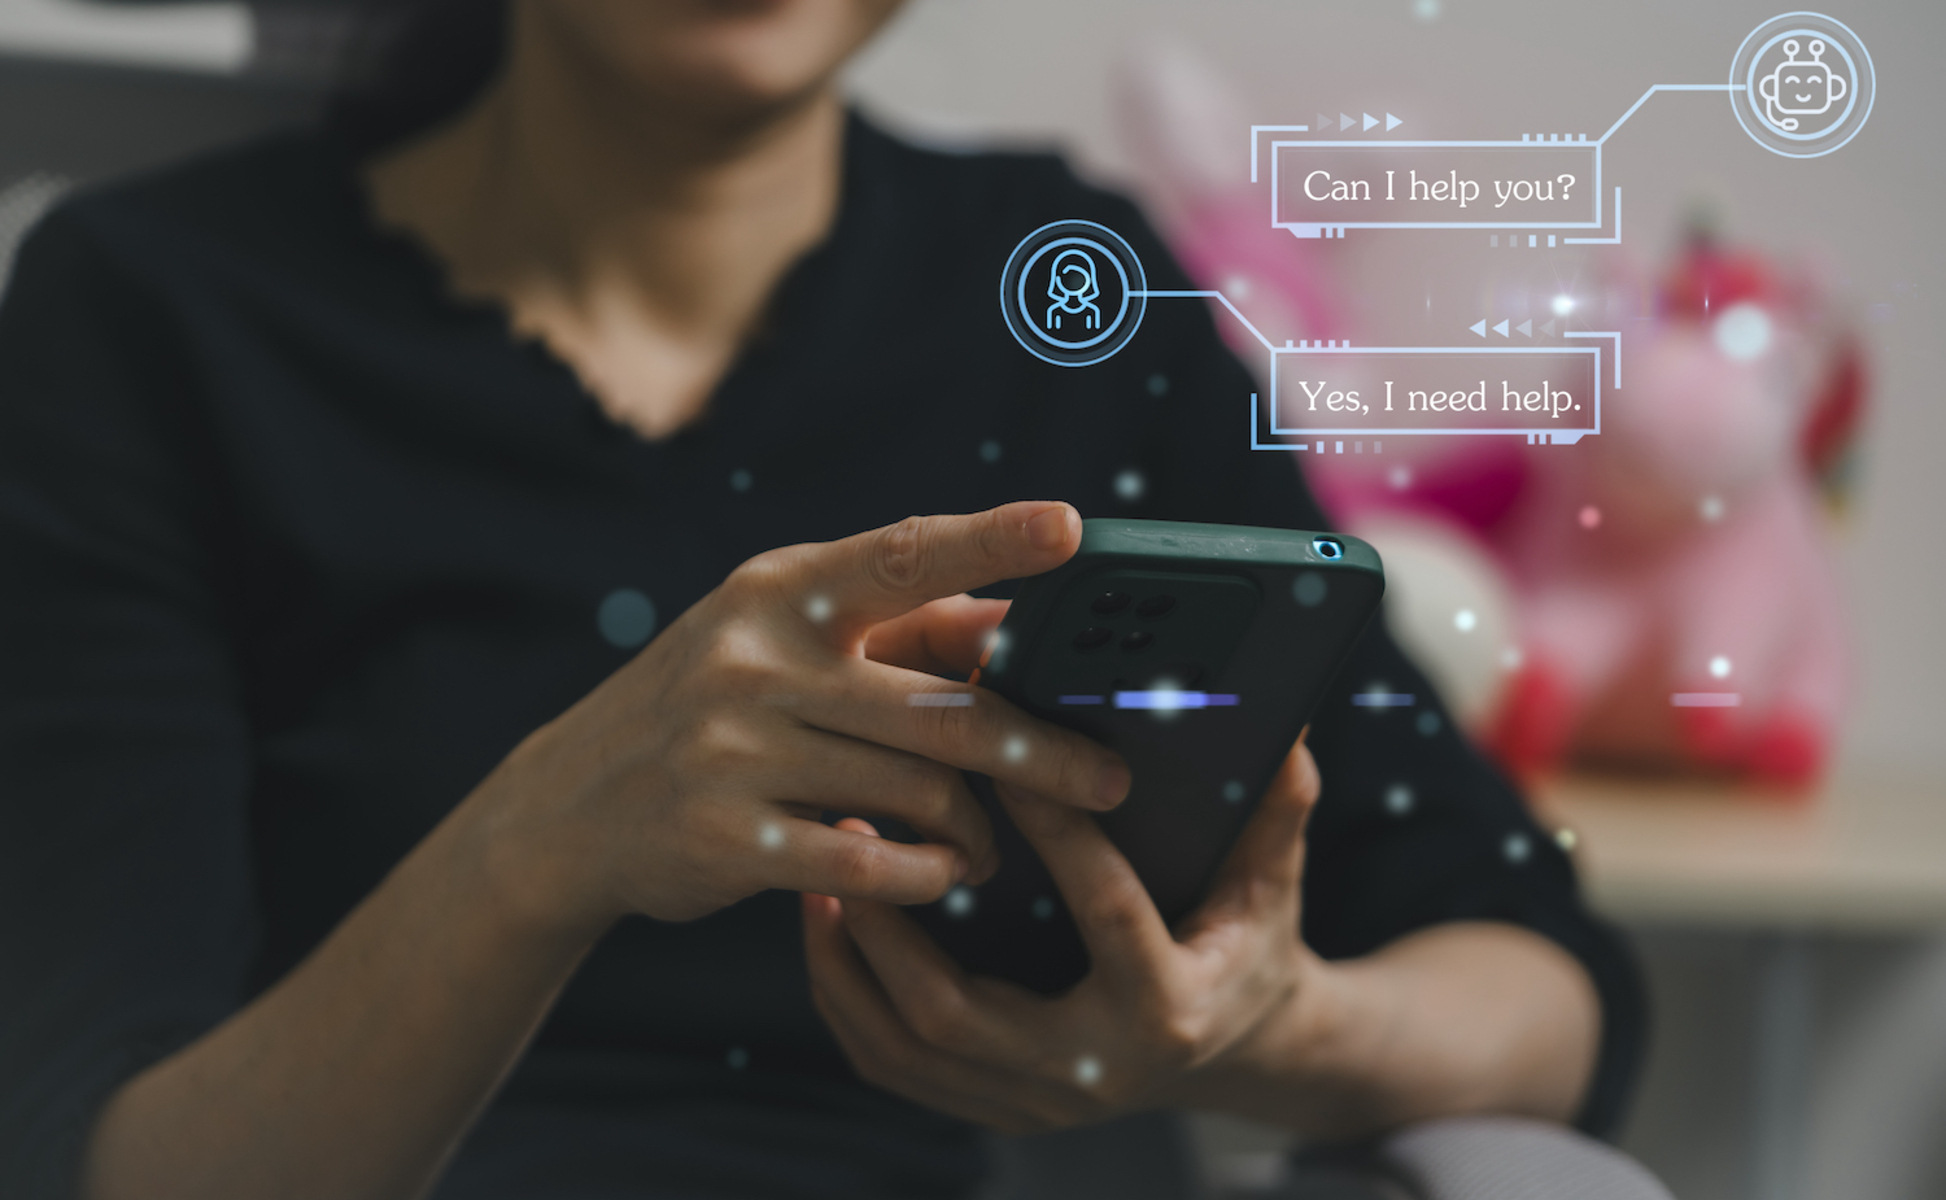 How Do Chatbots Know How To Respond?